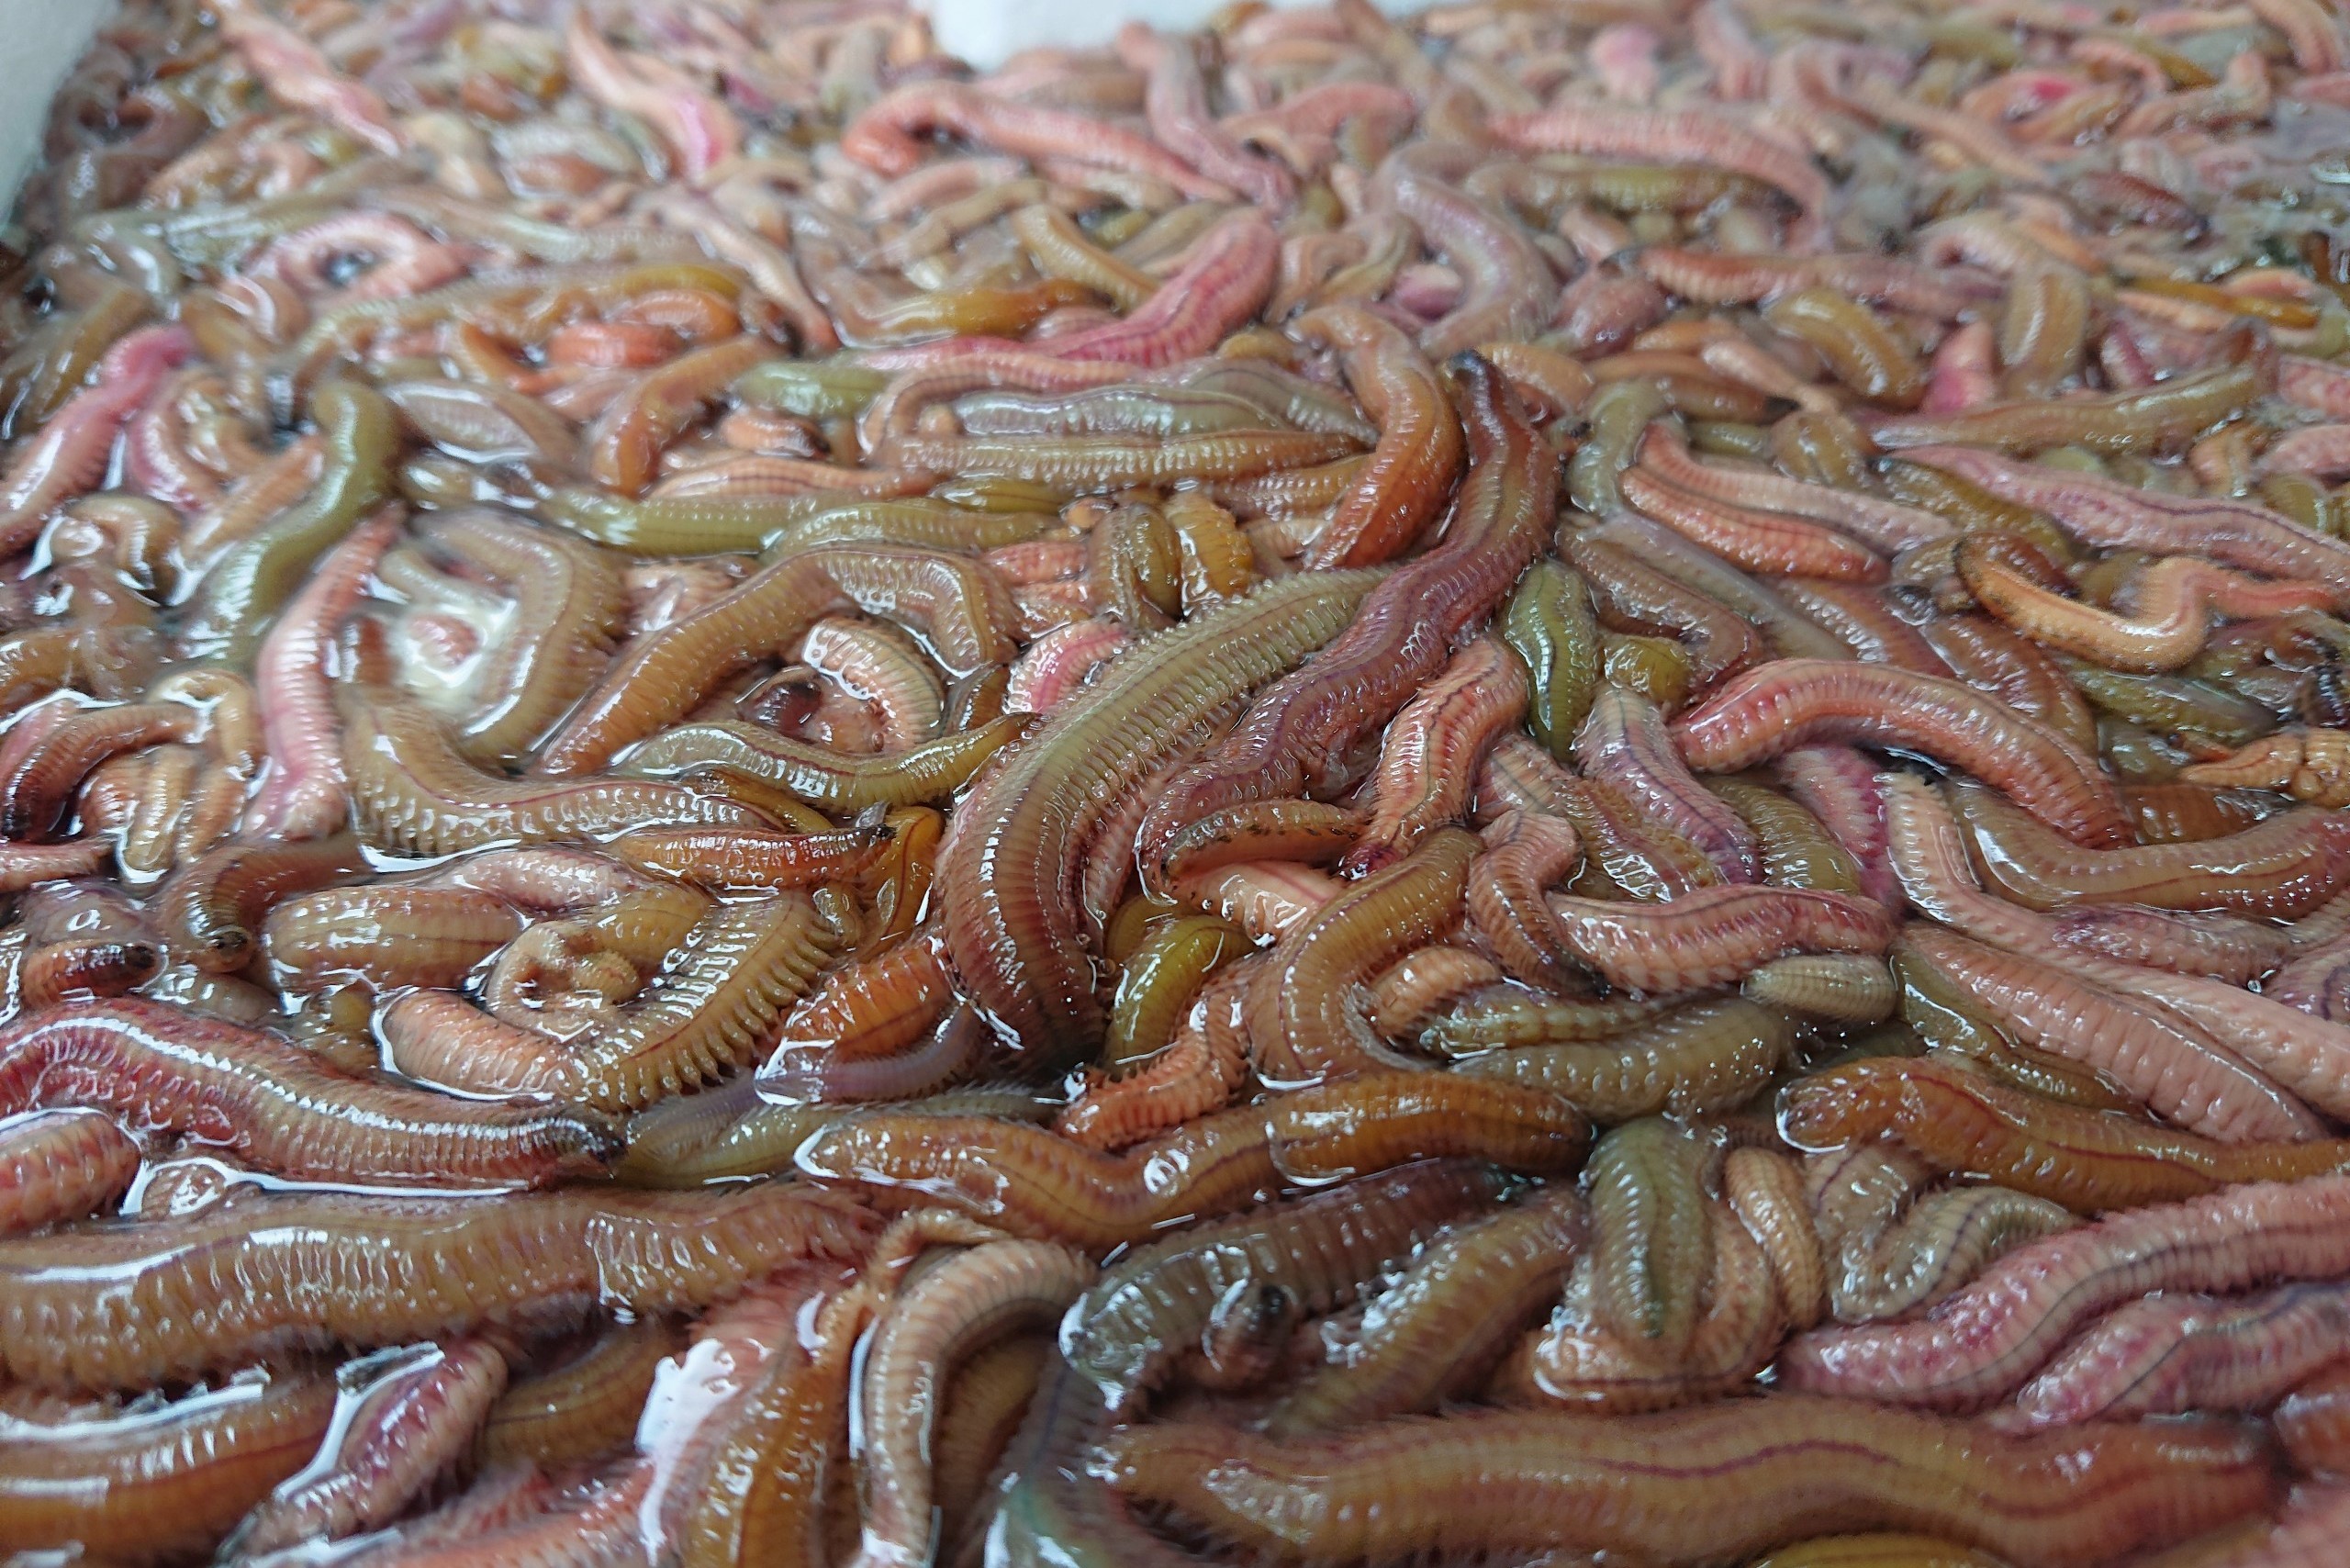 Ruoi (sand worms or Nereididae) are ready to be turned into omelets at Hung Thinh Restaurant in Hanoi’s Hoan Kiem District. Photo: Duong Lieu / Tuoi Tre News